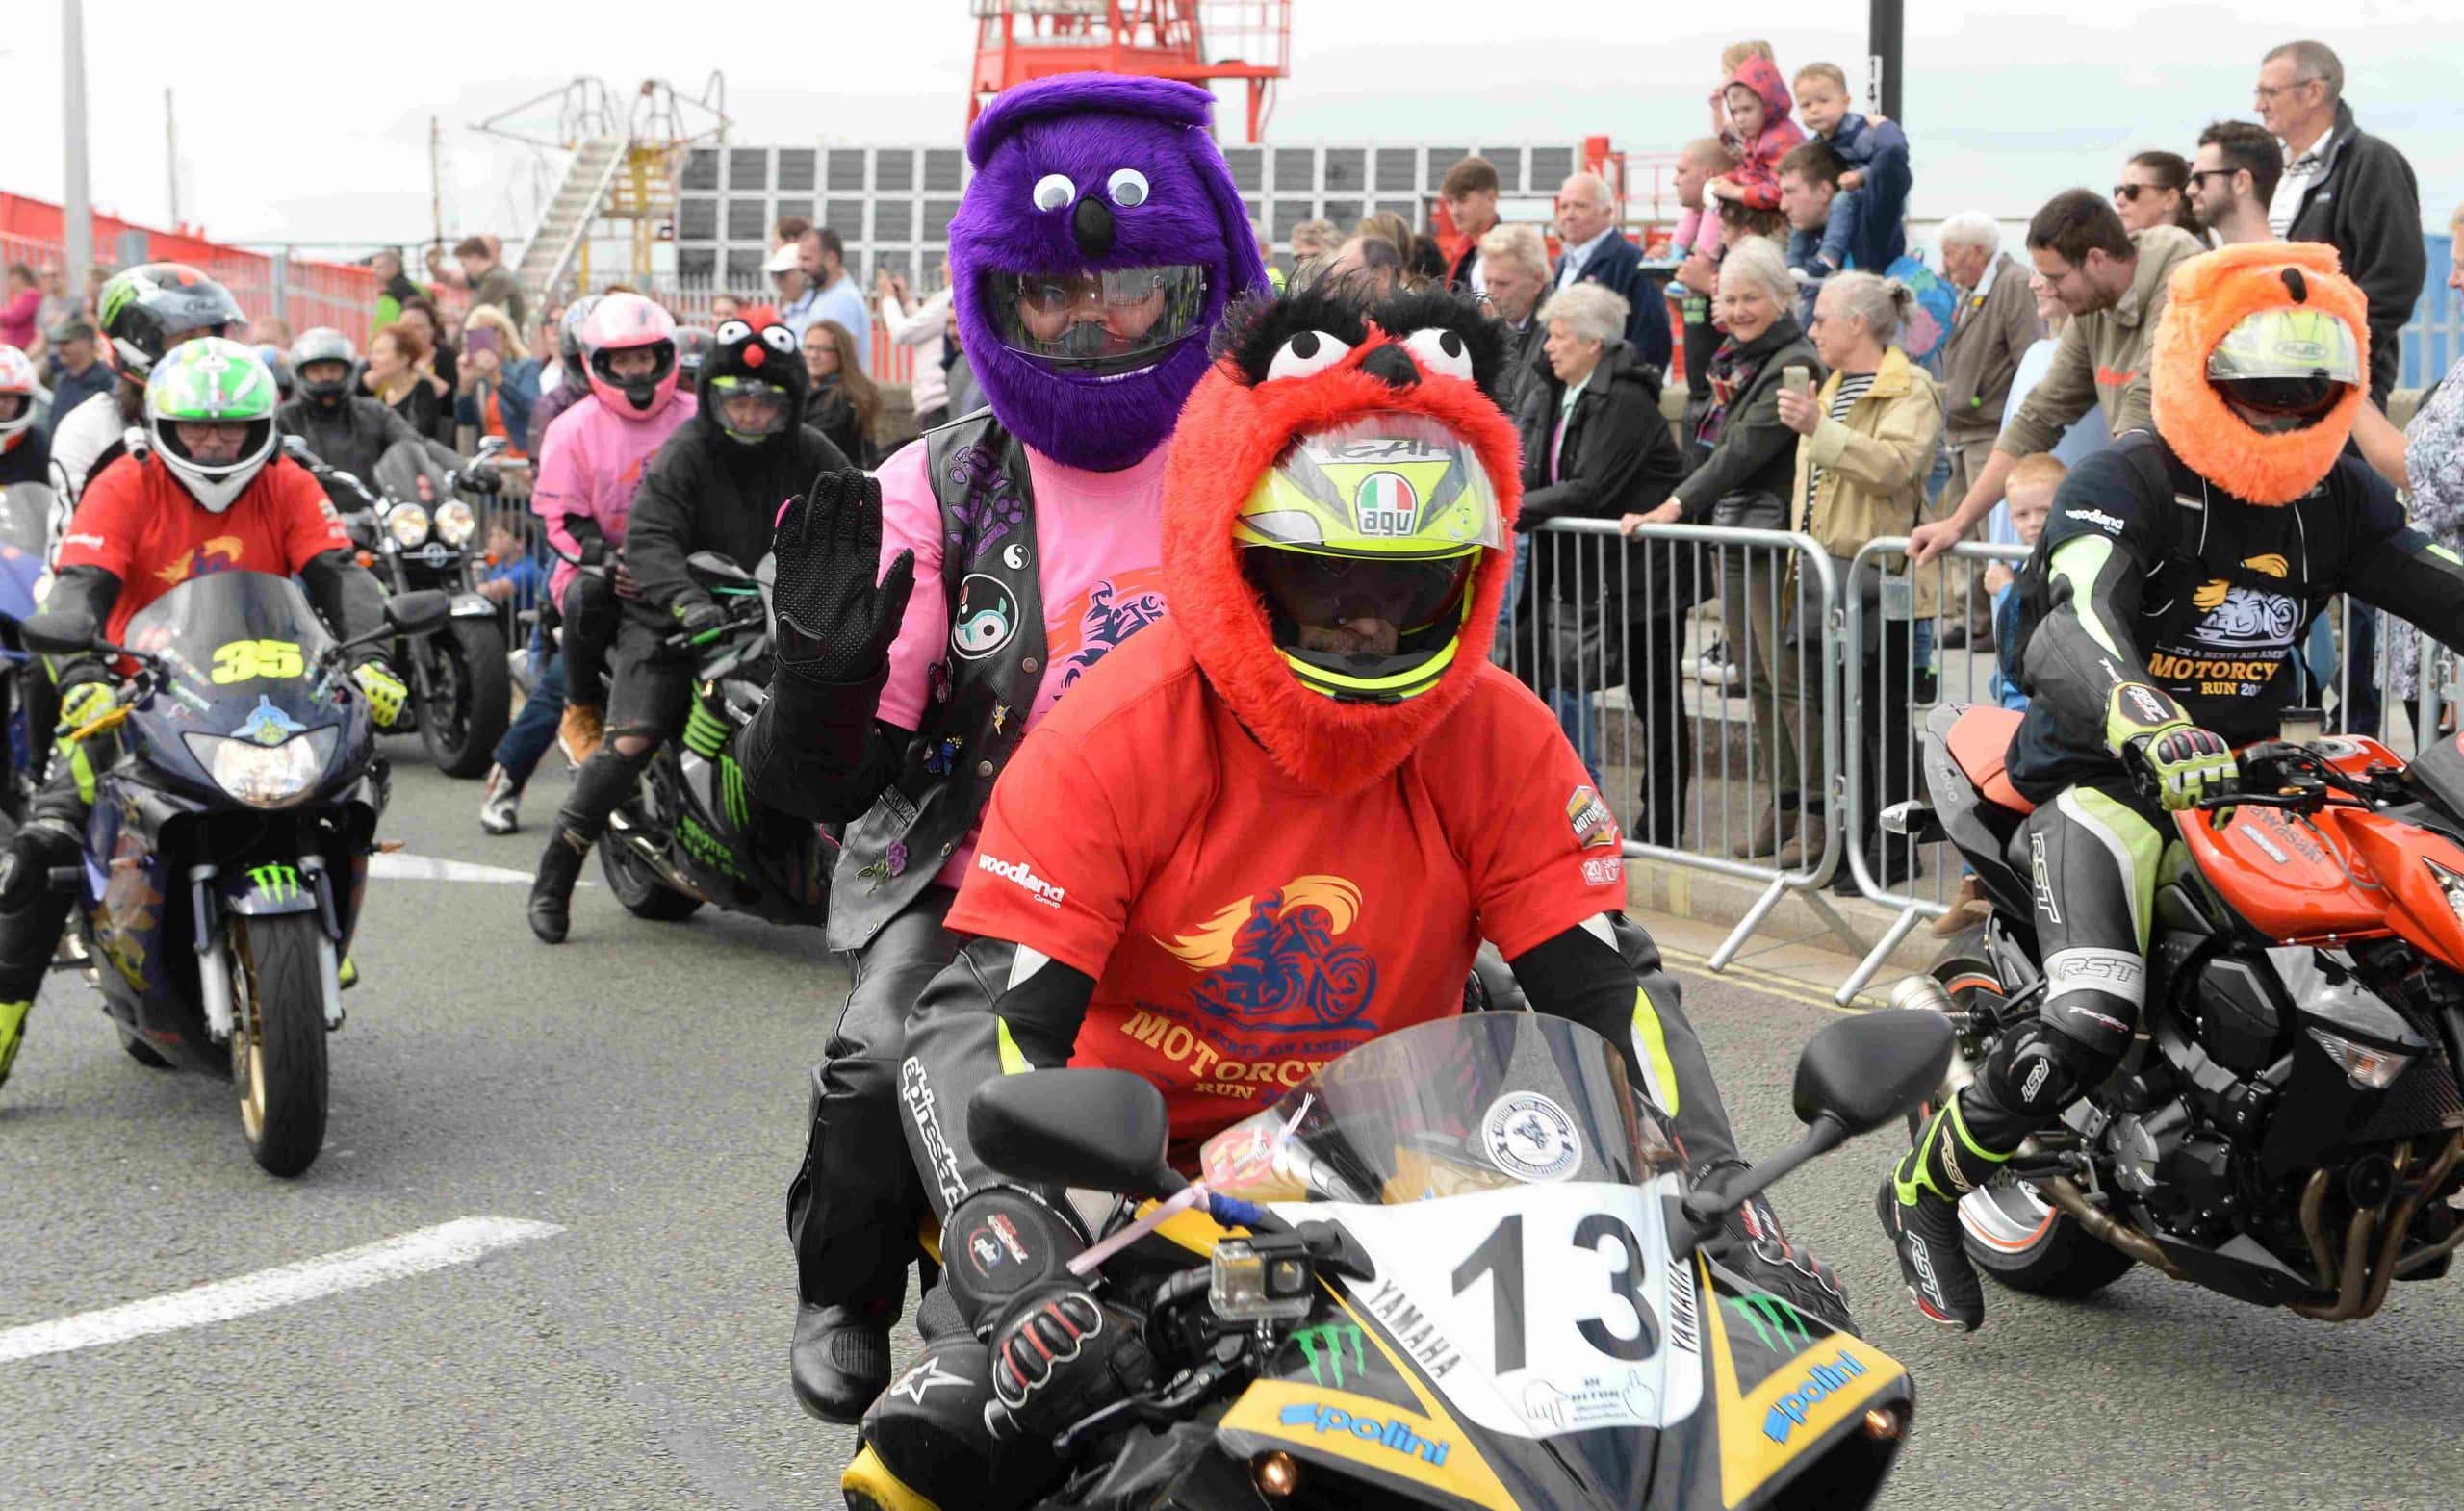 Thousands of bikers take to the road for EHAAT